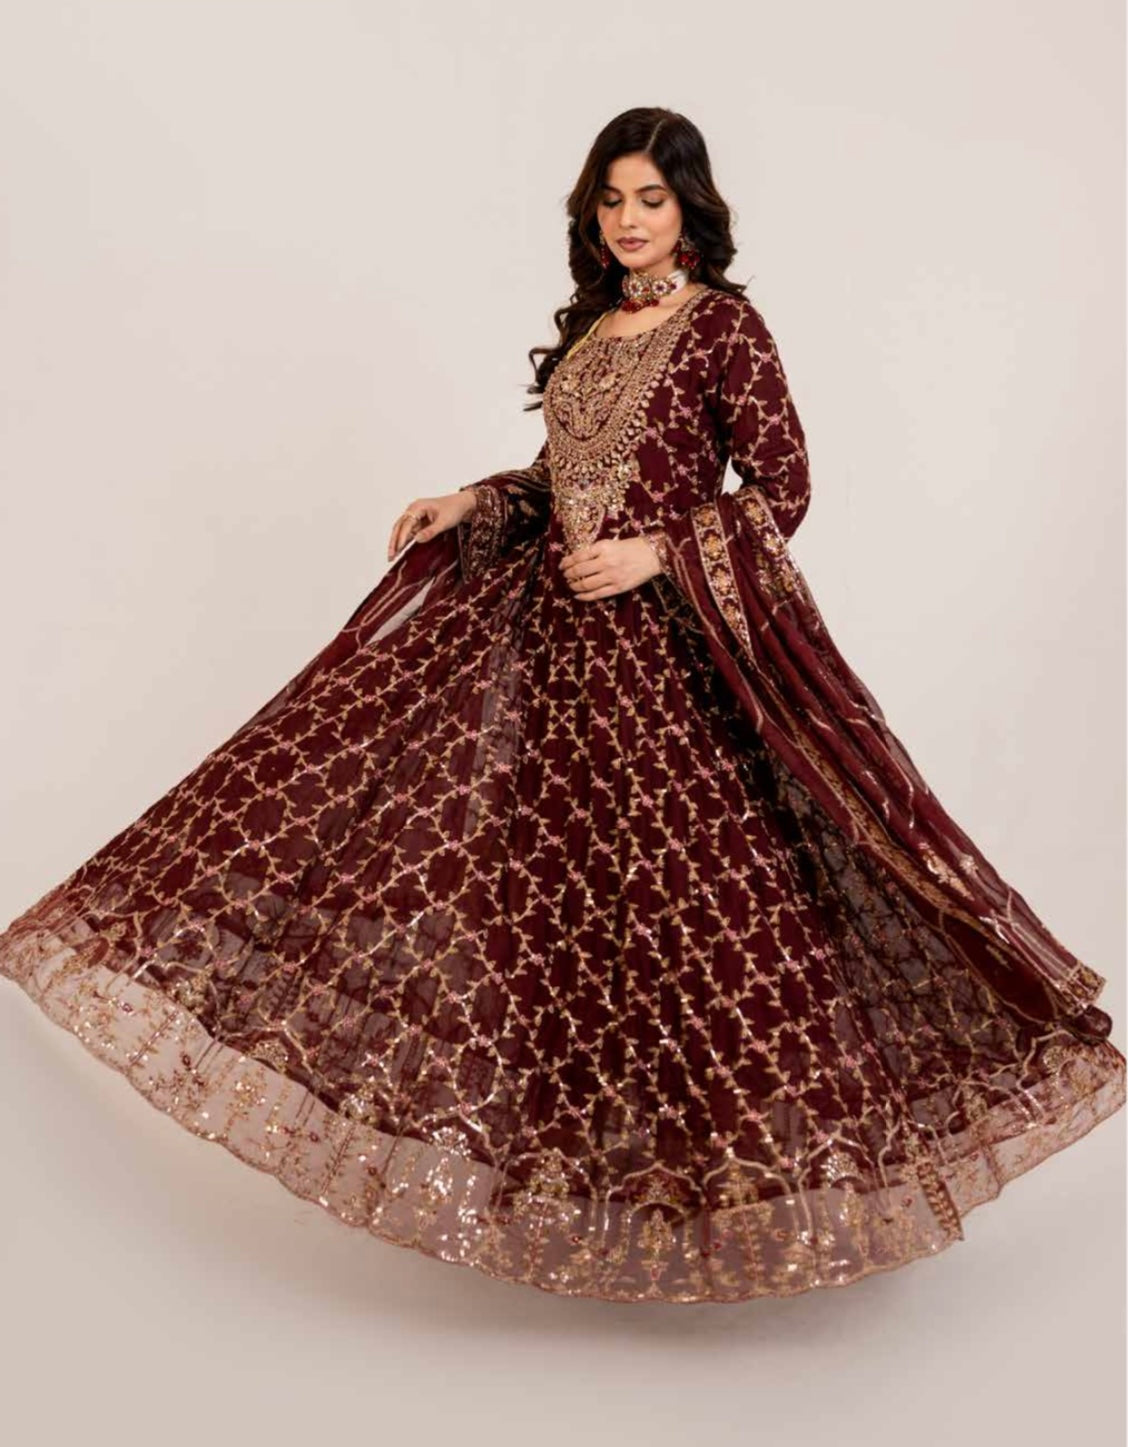 SIMRANS Shahjahan 3 piece embroidered chiffon long style dress -3528